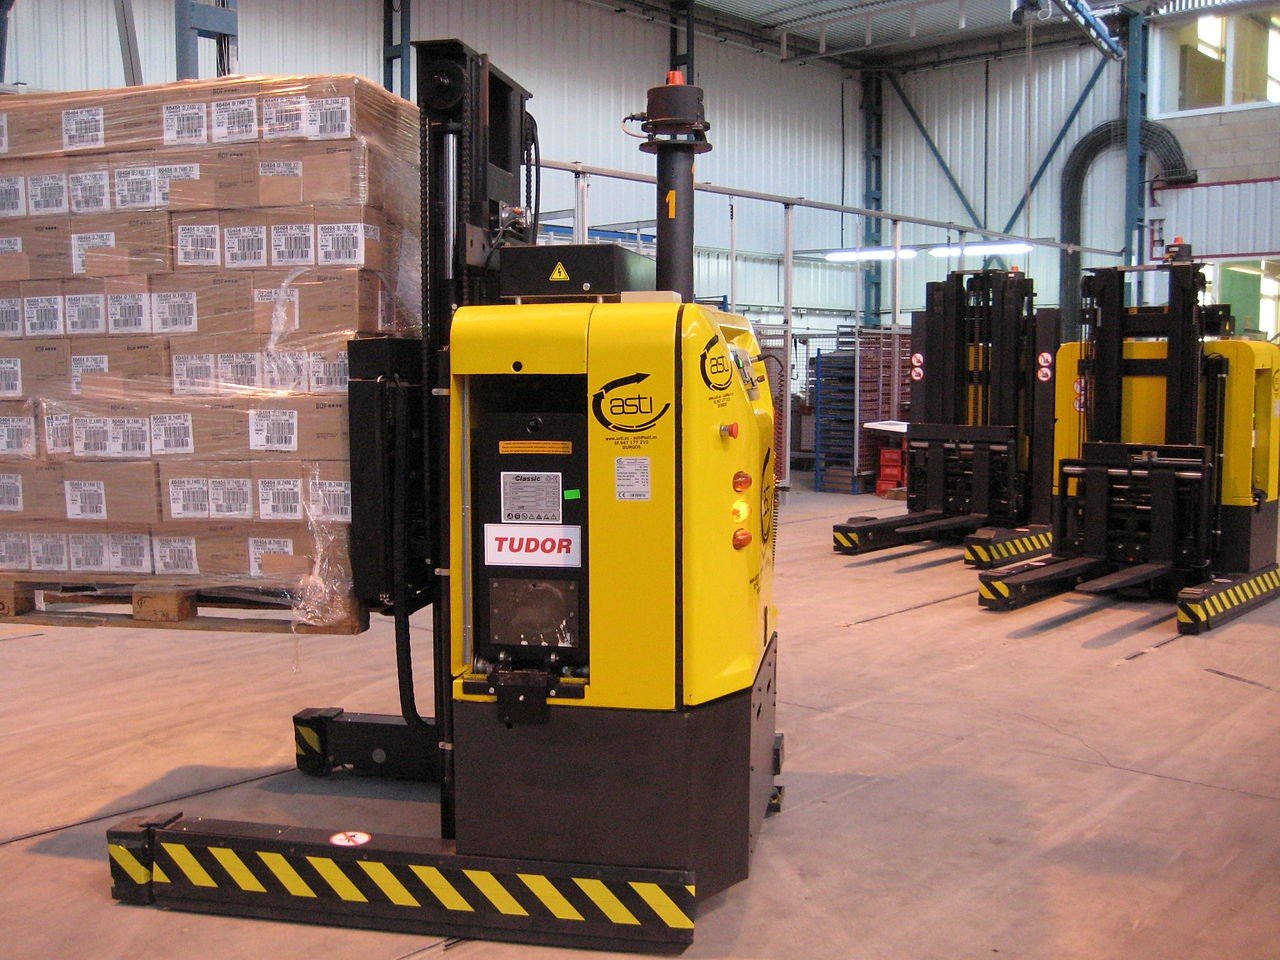 Figure 1. Automated guided vehicles like this one can be used to maneuver within small warehouse spaces. Source: Carmenter/CC BY-SA 4.0